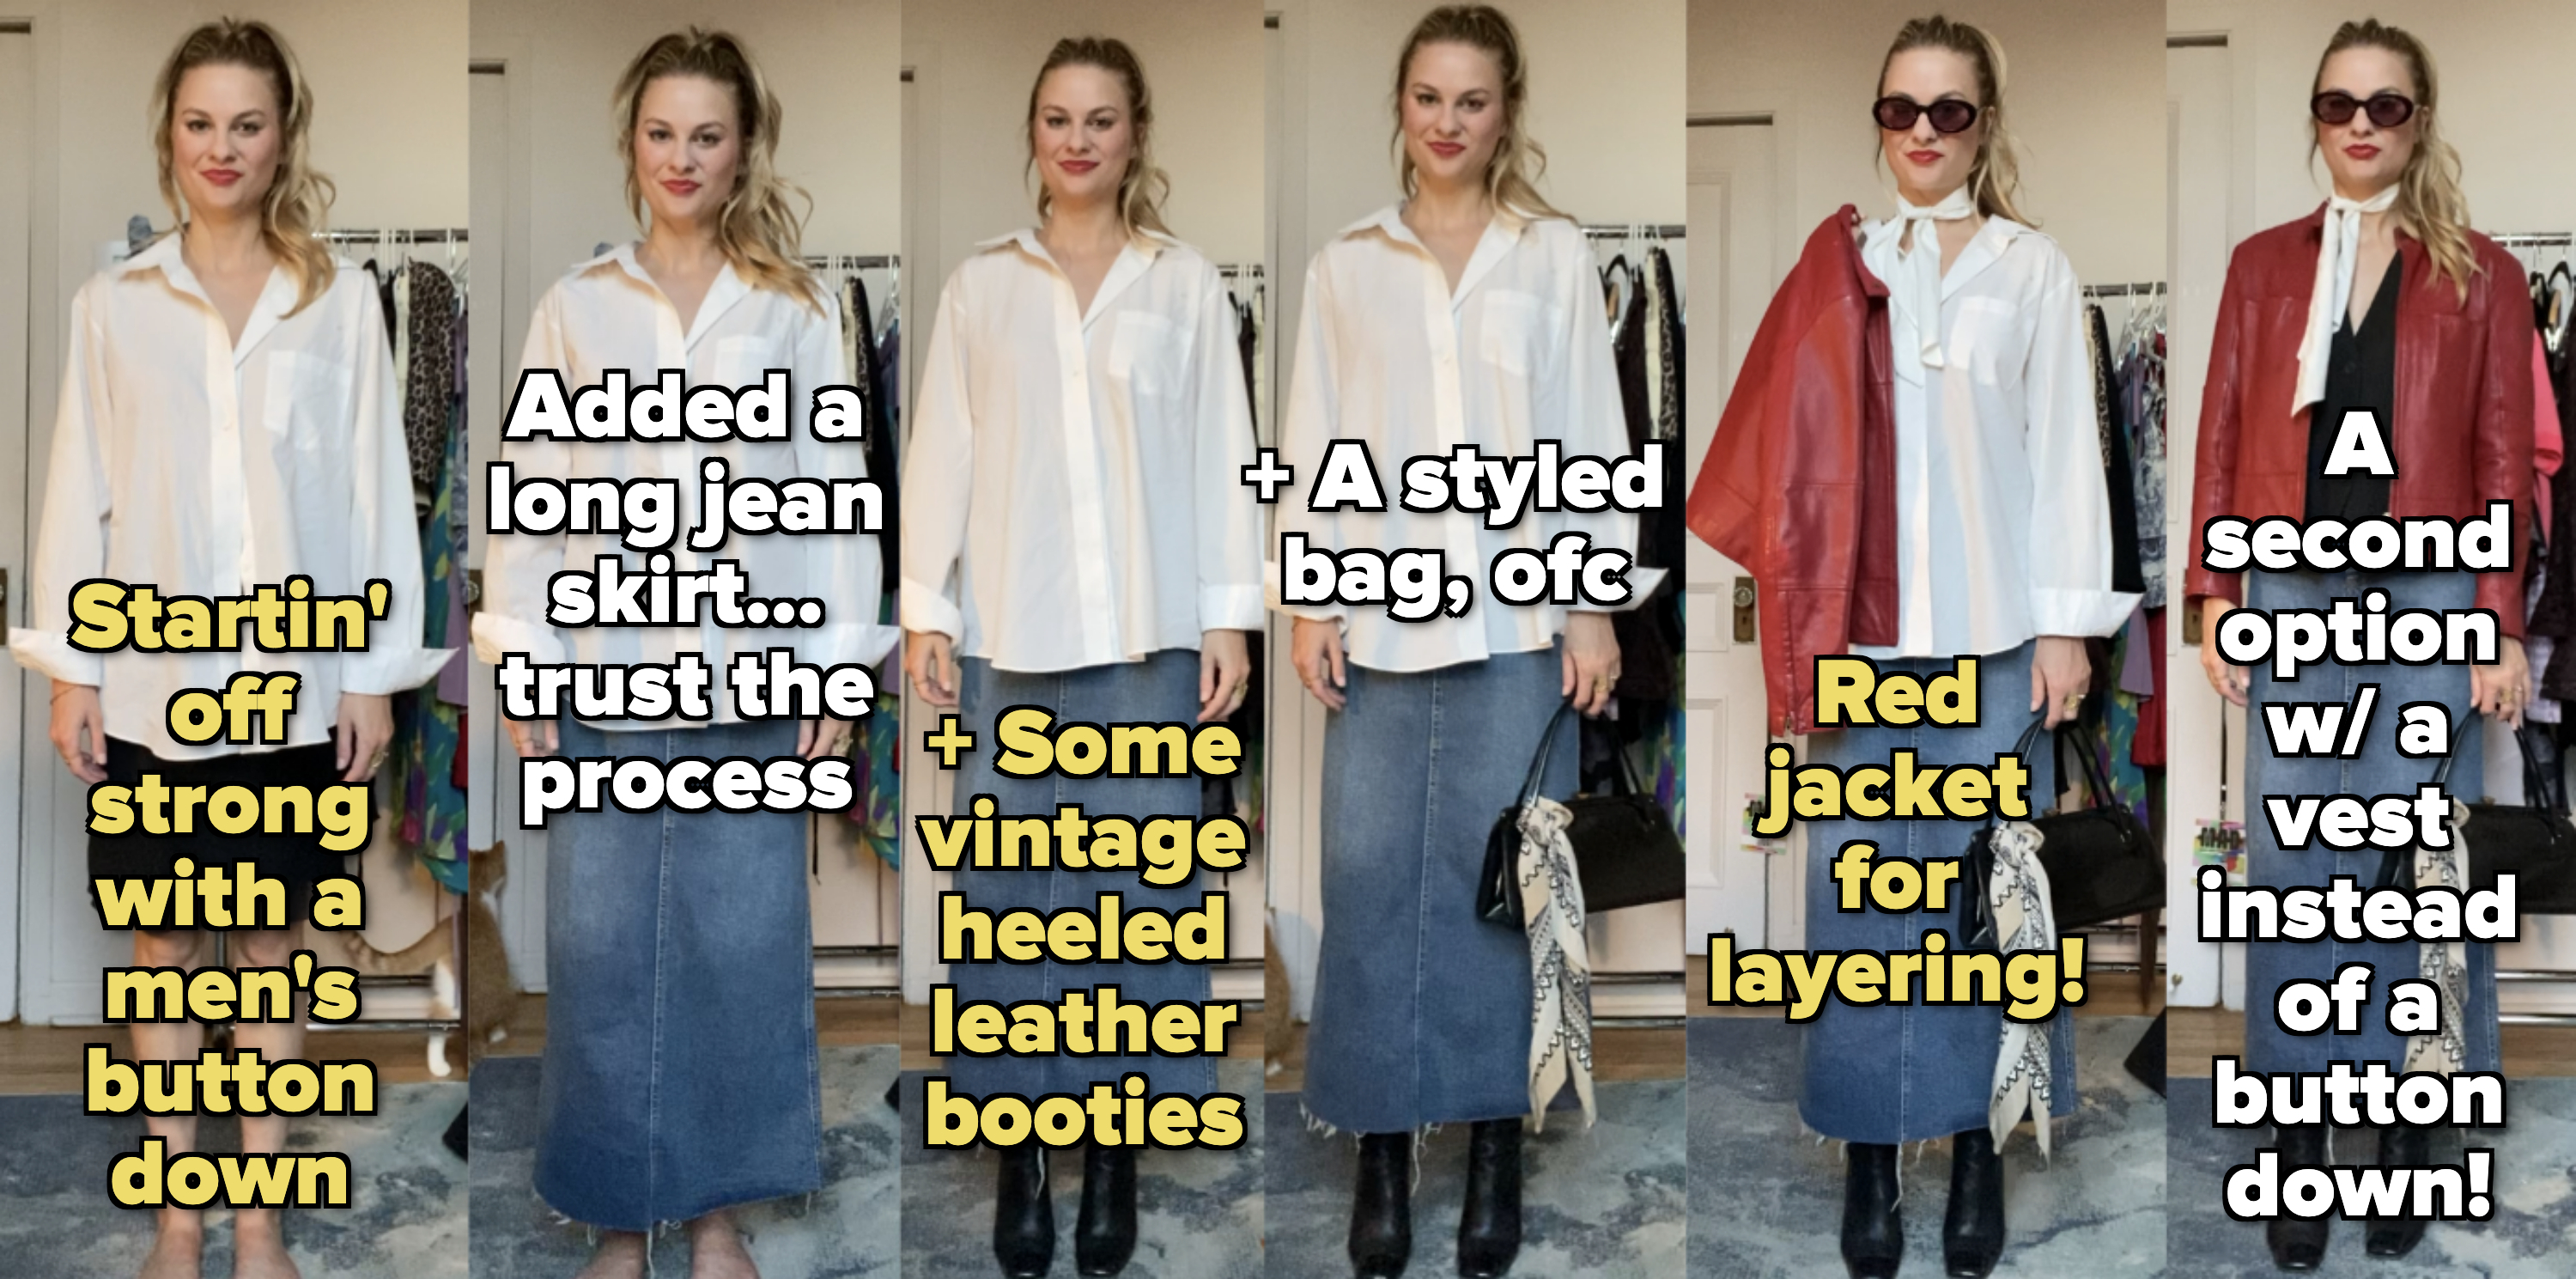 Me deconstructing how I styled the fifth outfit by mismatching tailored pieces with a maxi jean skirt